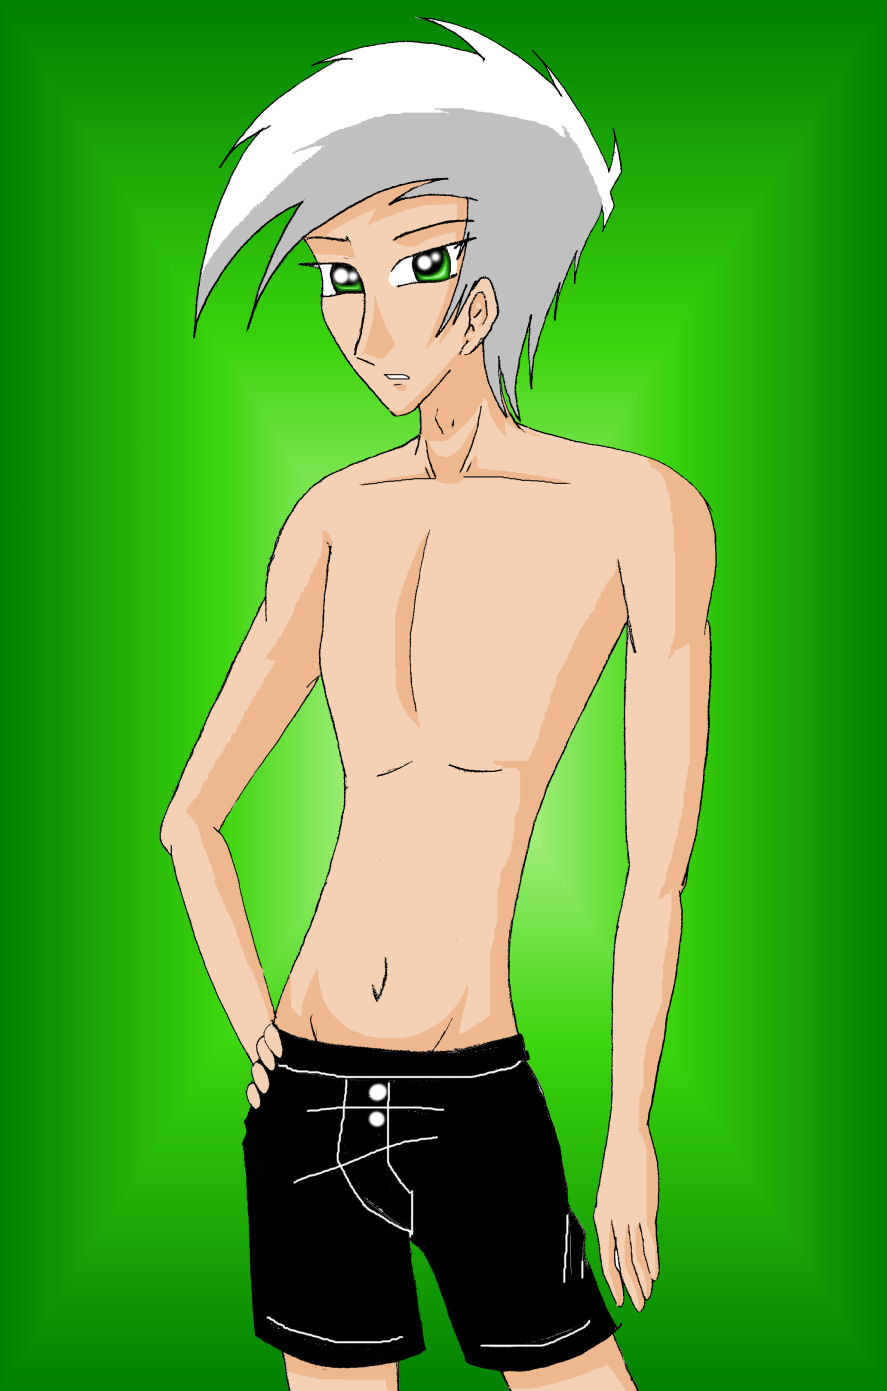 Danny Phantom In Boxers Only (Contest Entry) by SetoAngel01